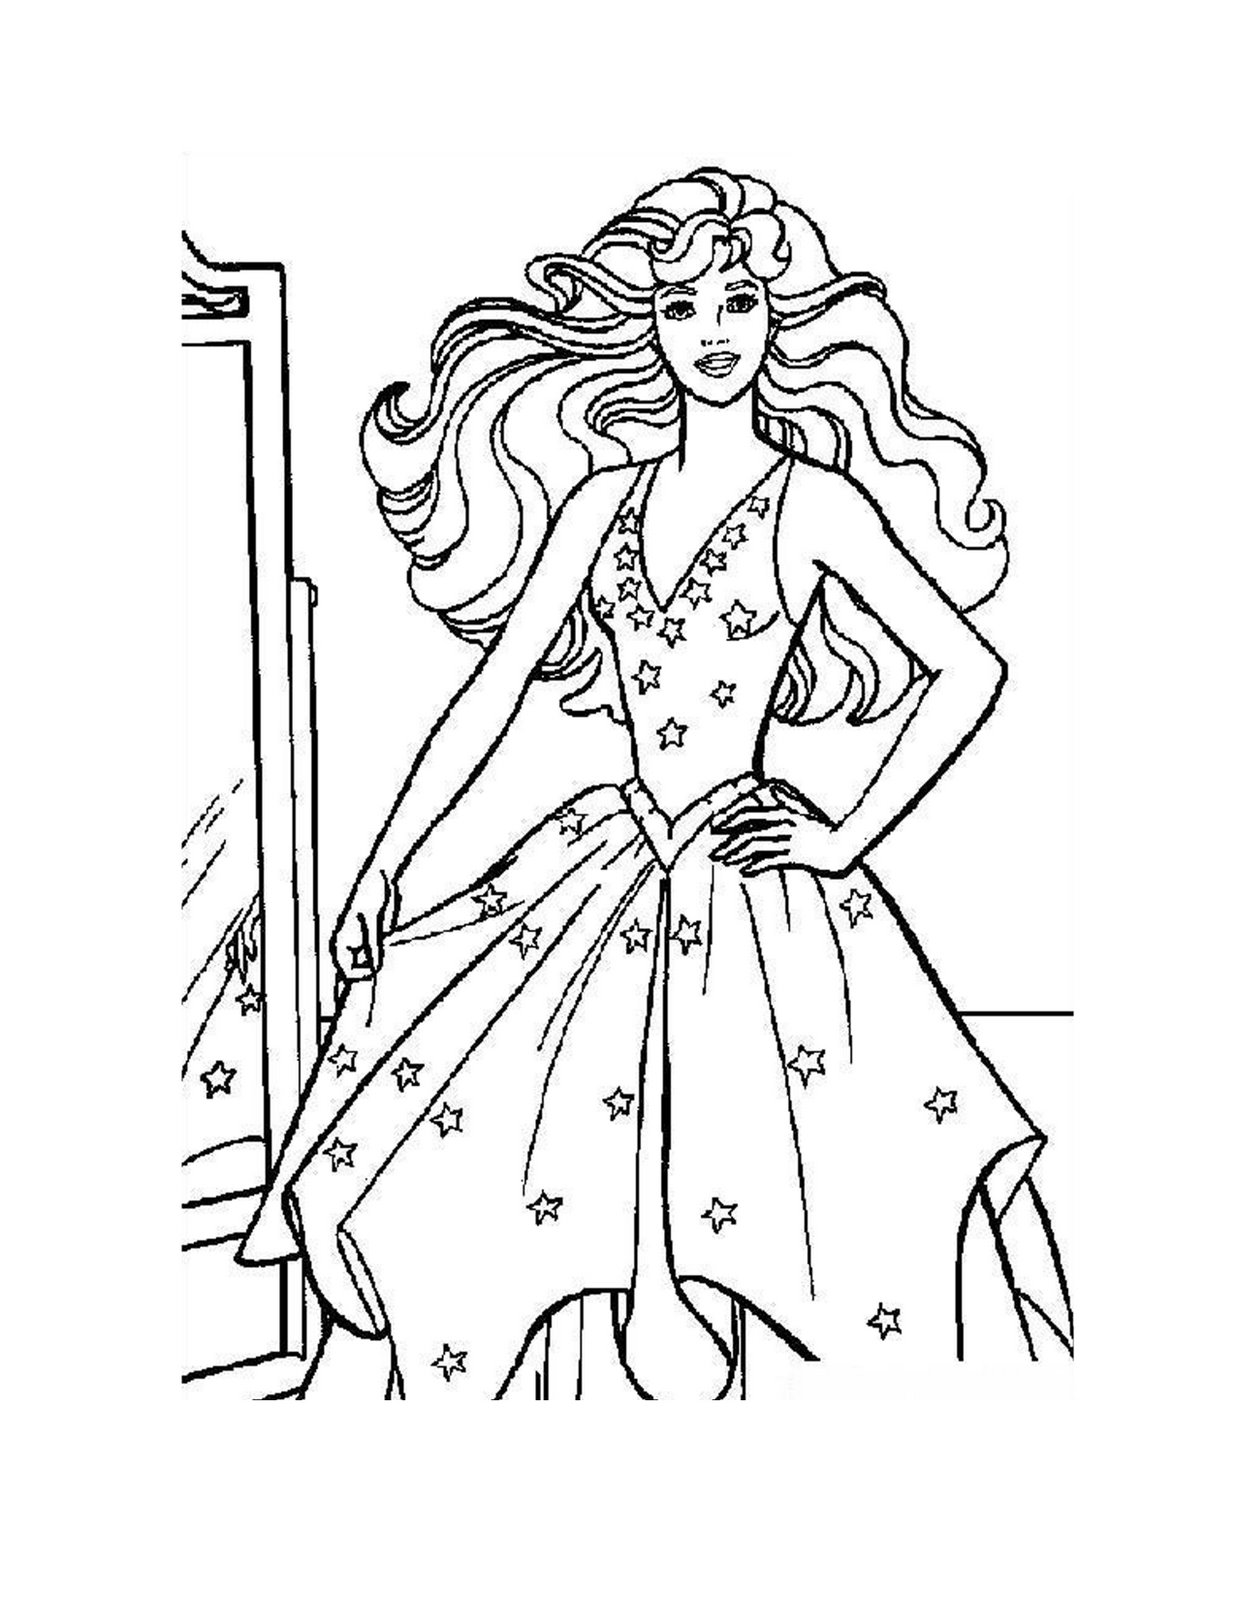 Fashionista Barbie Coloring Pages | Coloring Pages Gallery